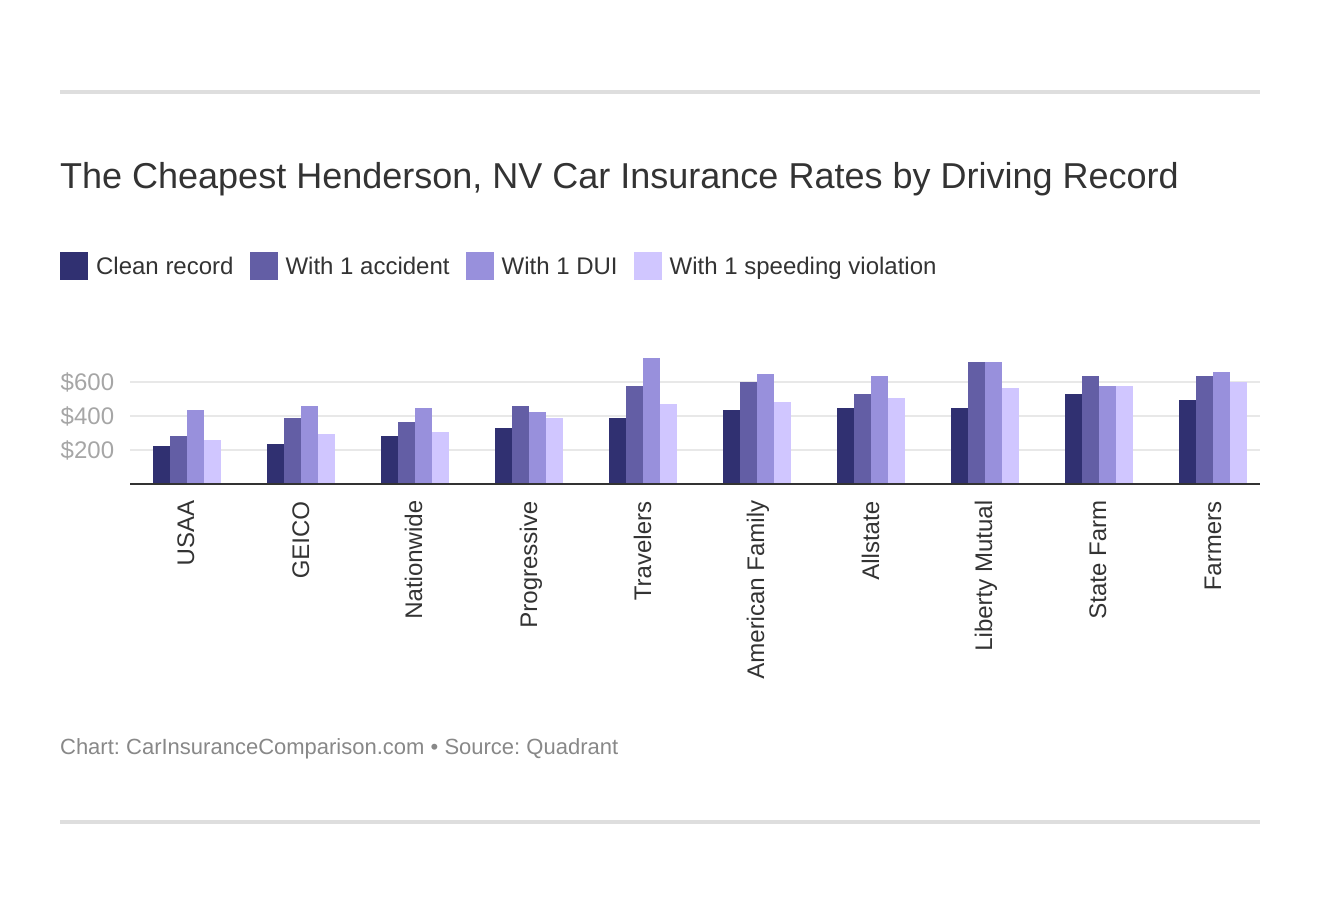 The Cheapest Henderson, NV Car Insurance Rates by Driving Record